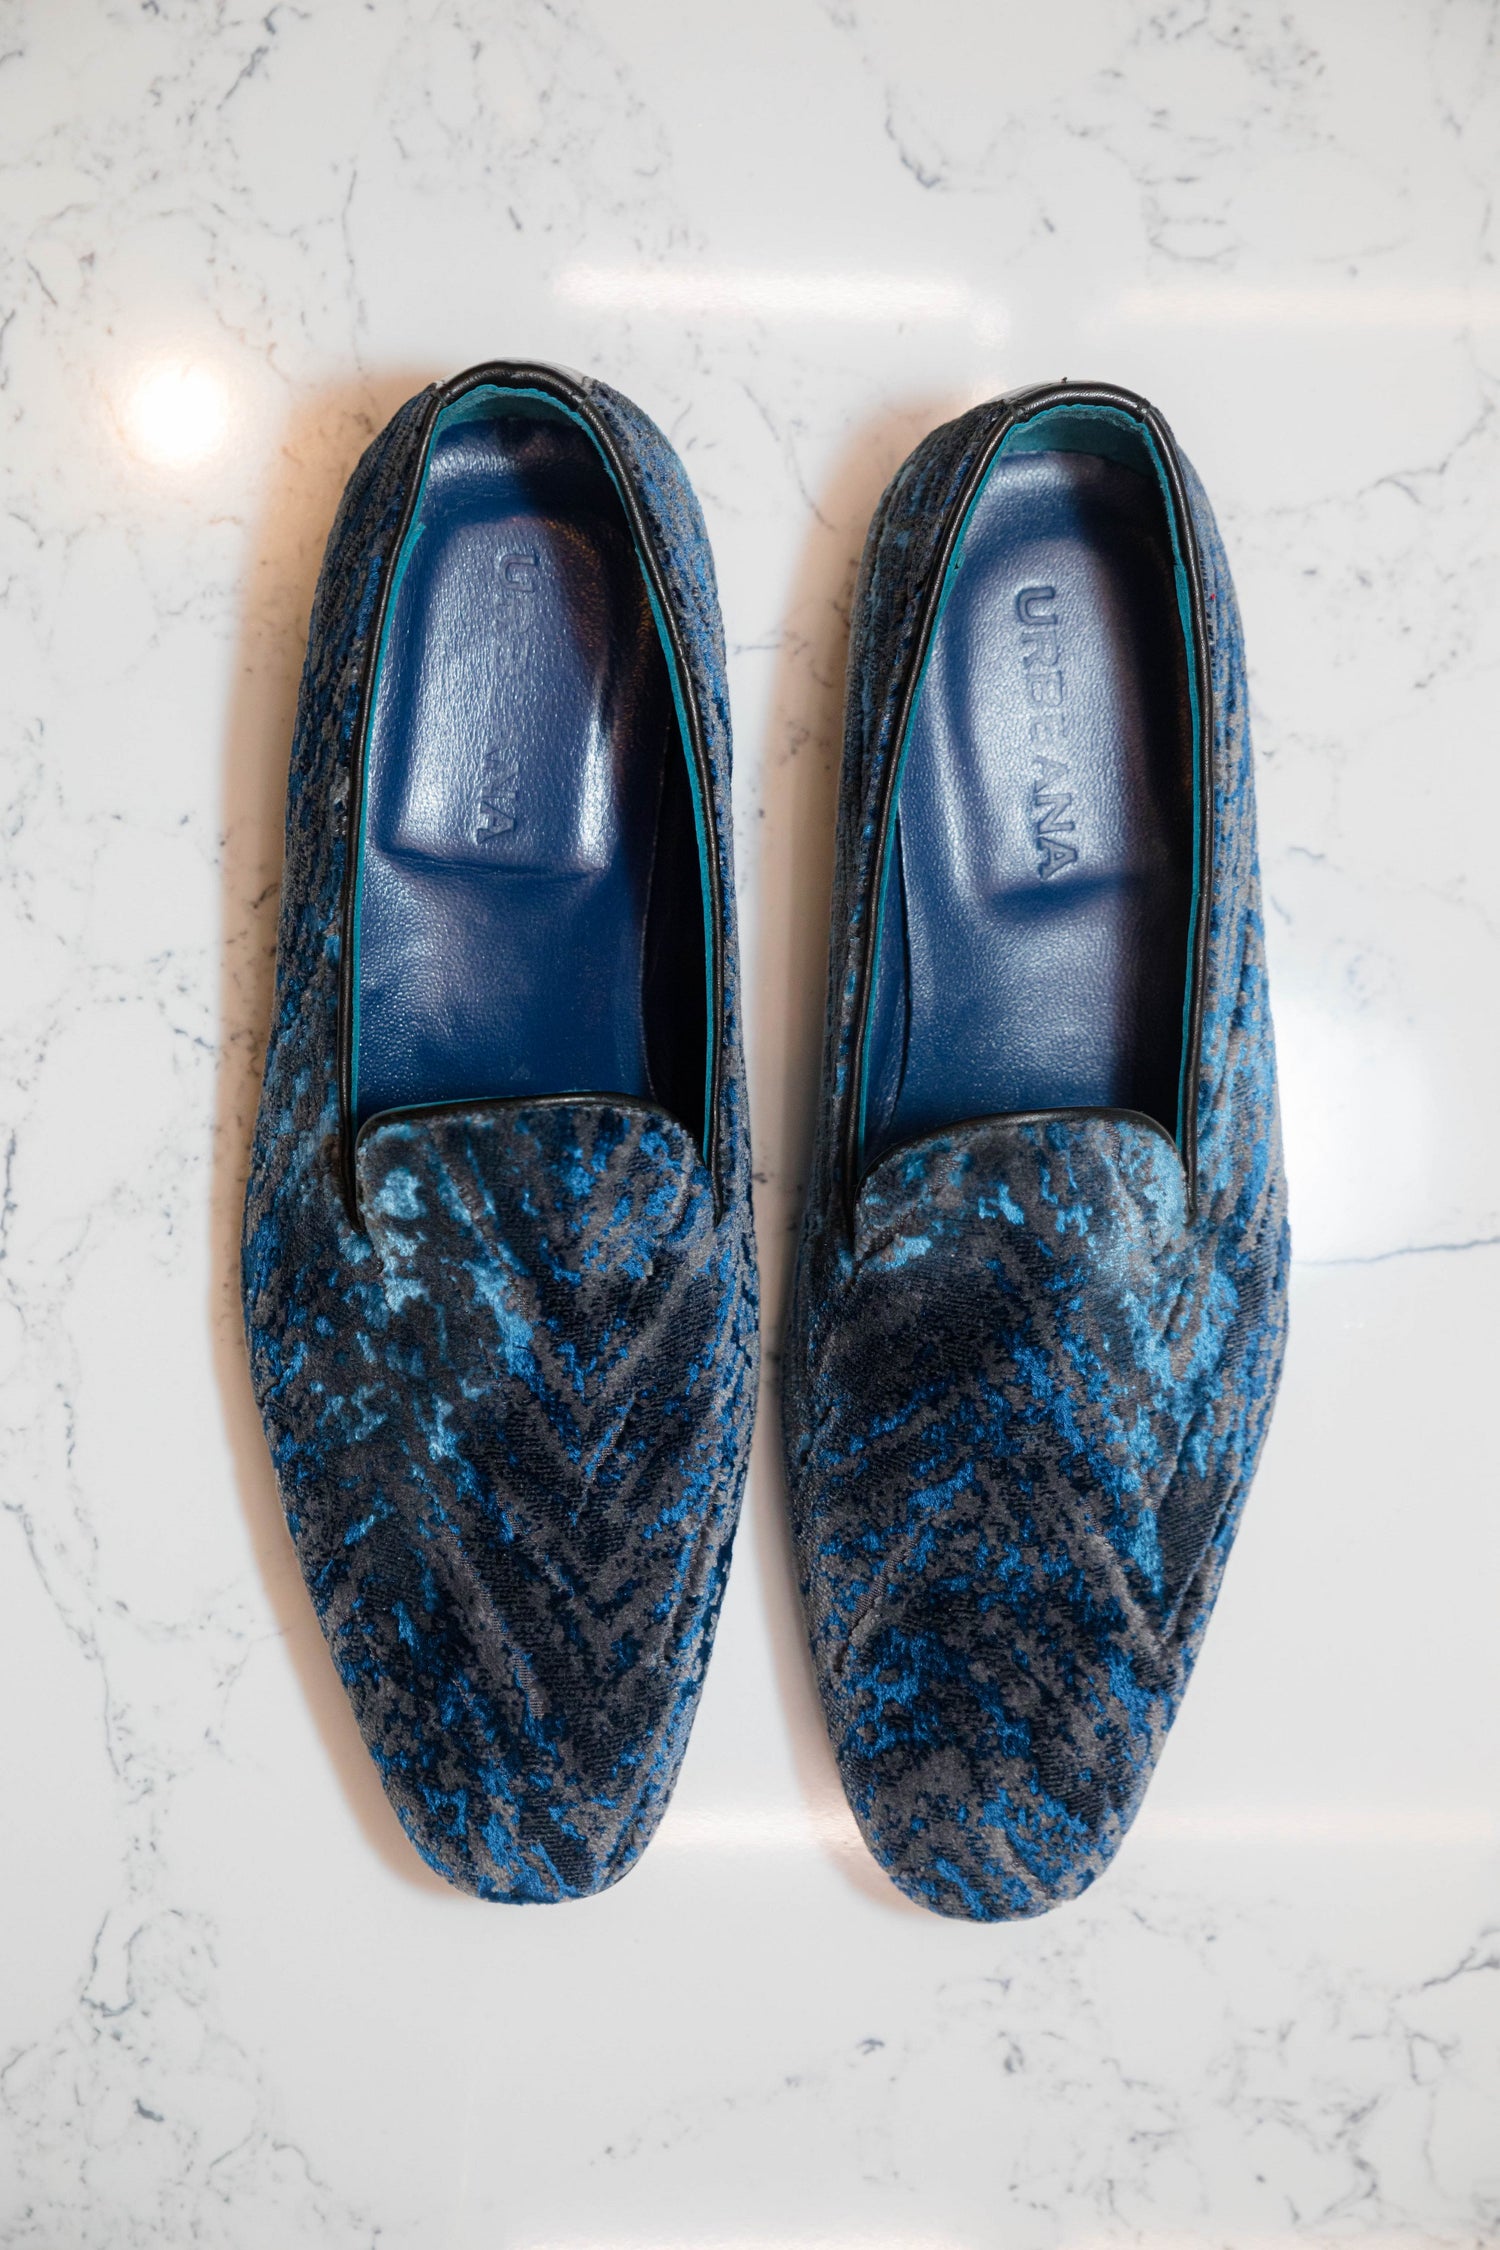 The Ocean Loafers - Loafers by Urbbana